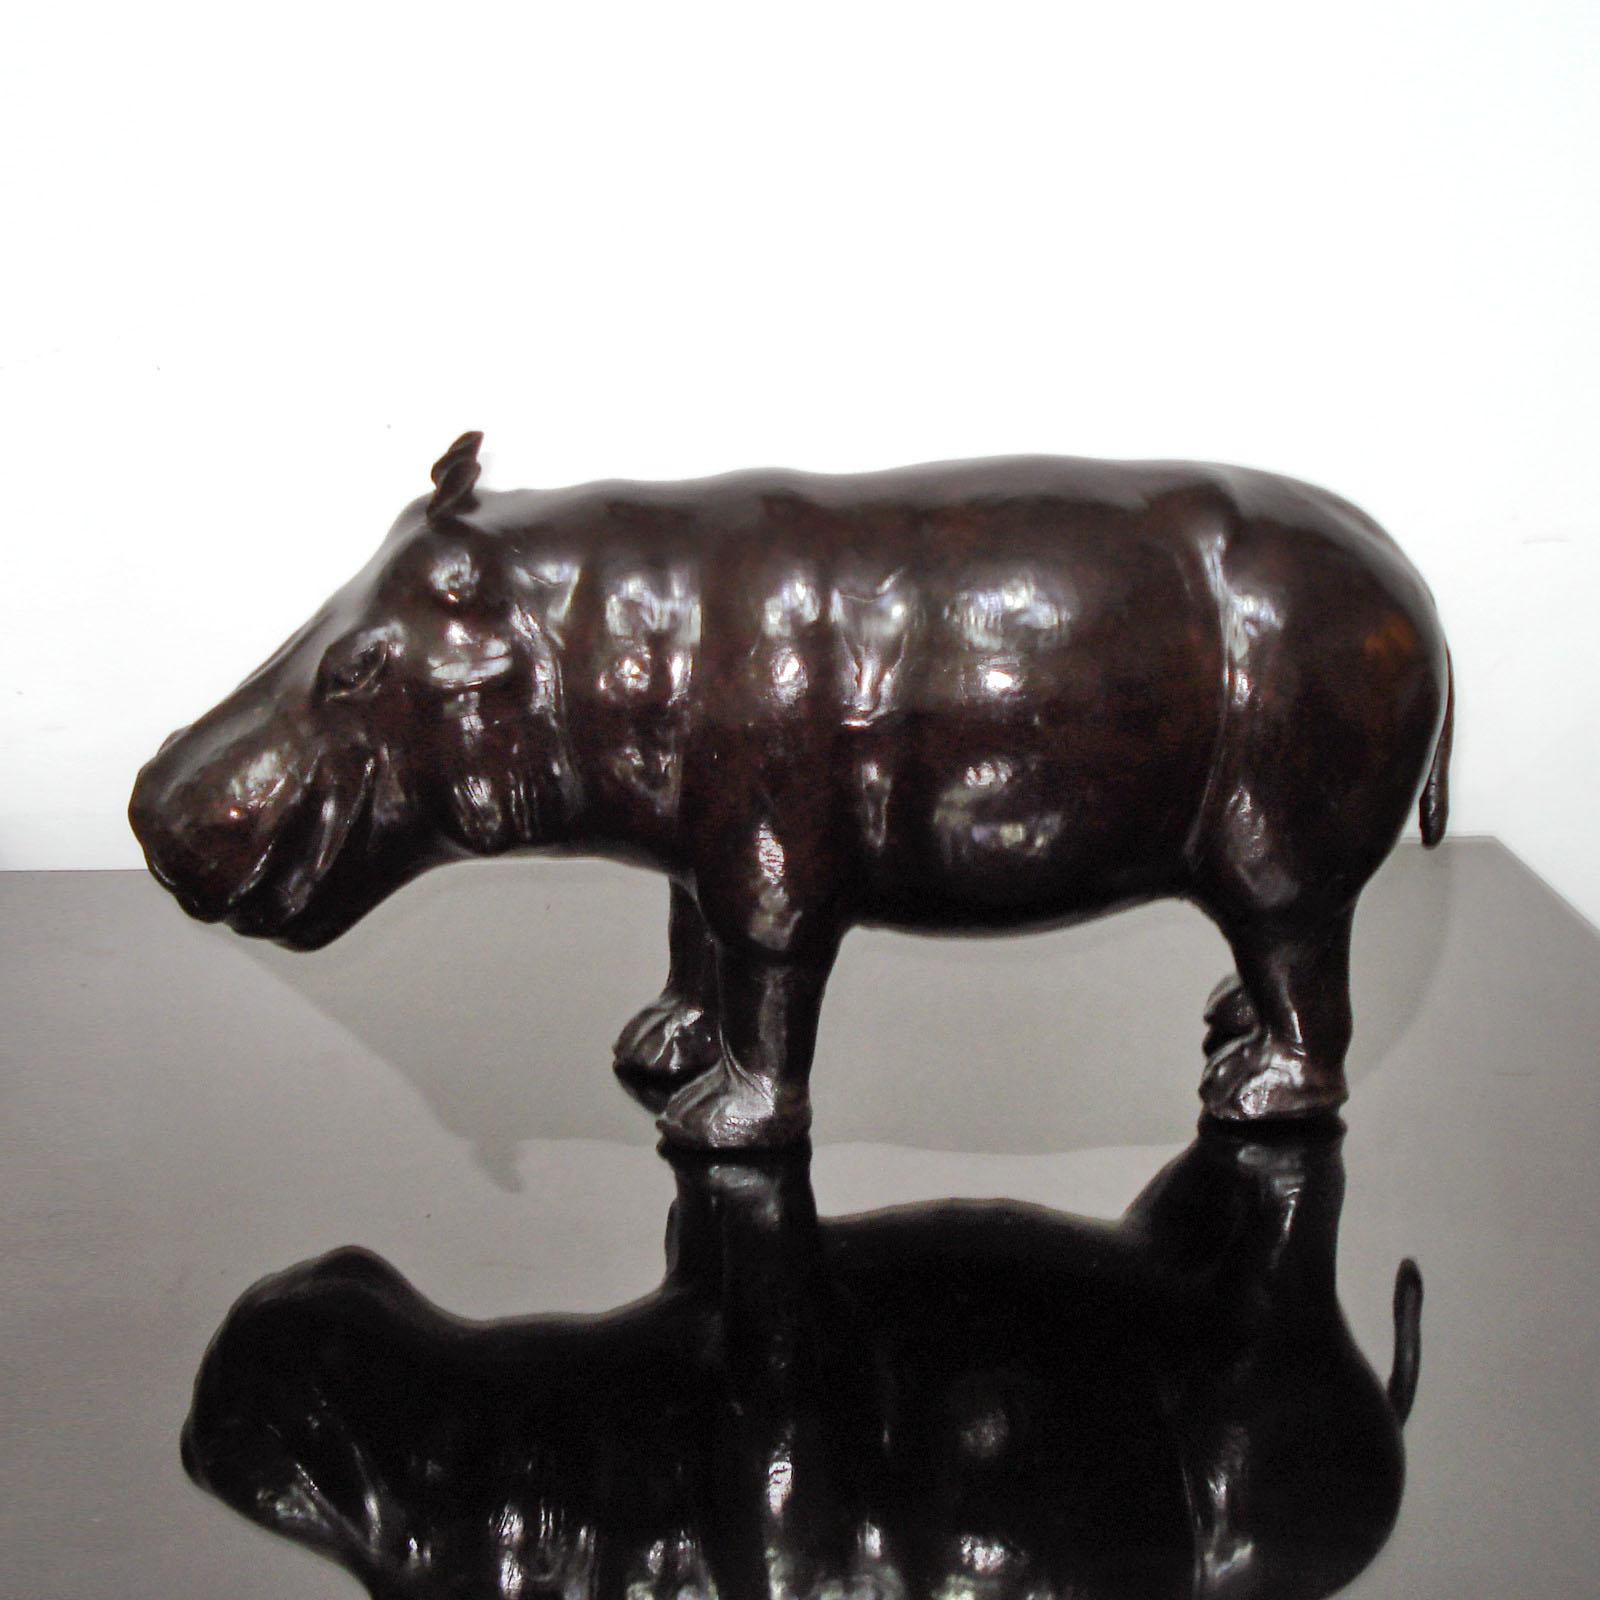 Leather hippo designed by Dimitri Omersa for Abercrombie & Fitch. Retailed by Liberty of London.
In very good used condition.
Dimensions: 45x 1 6 x 23 cm.